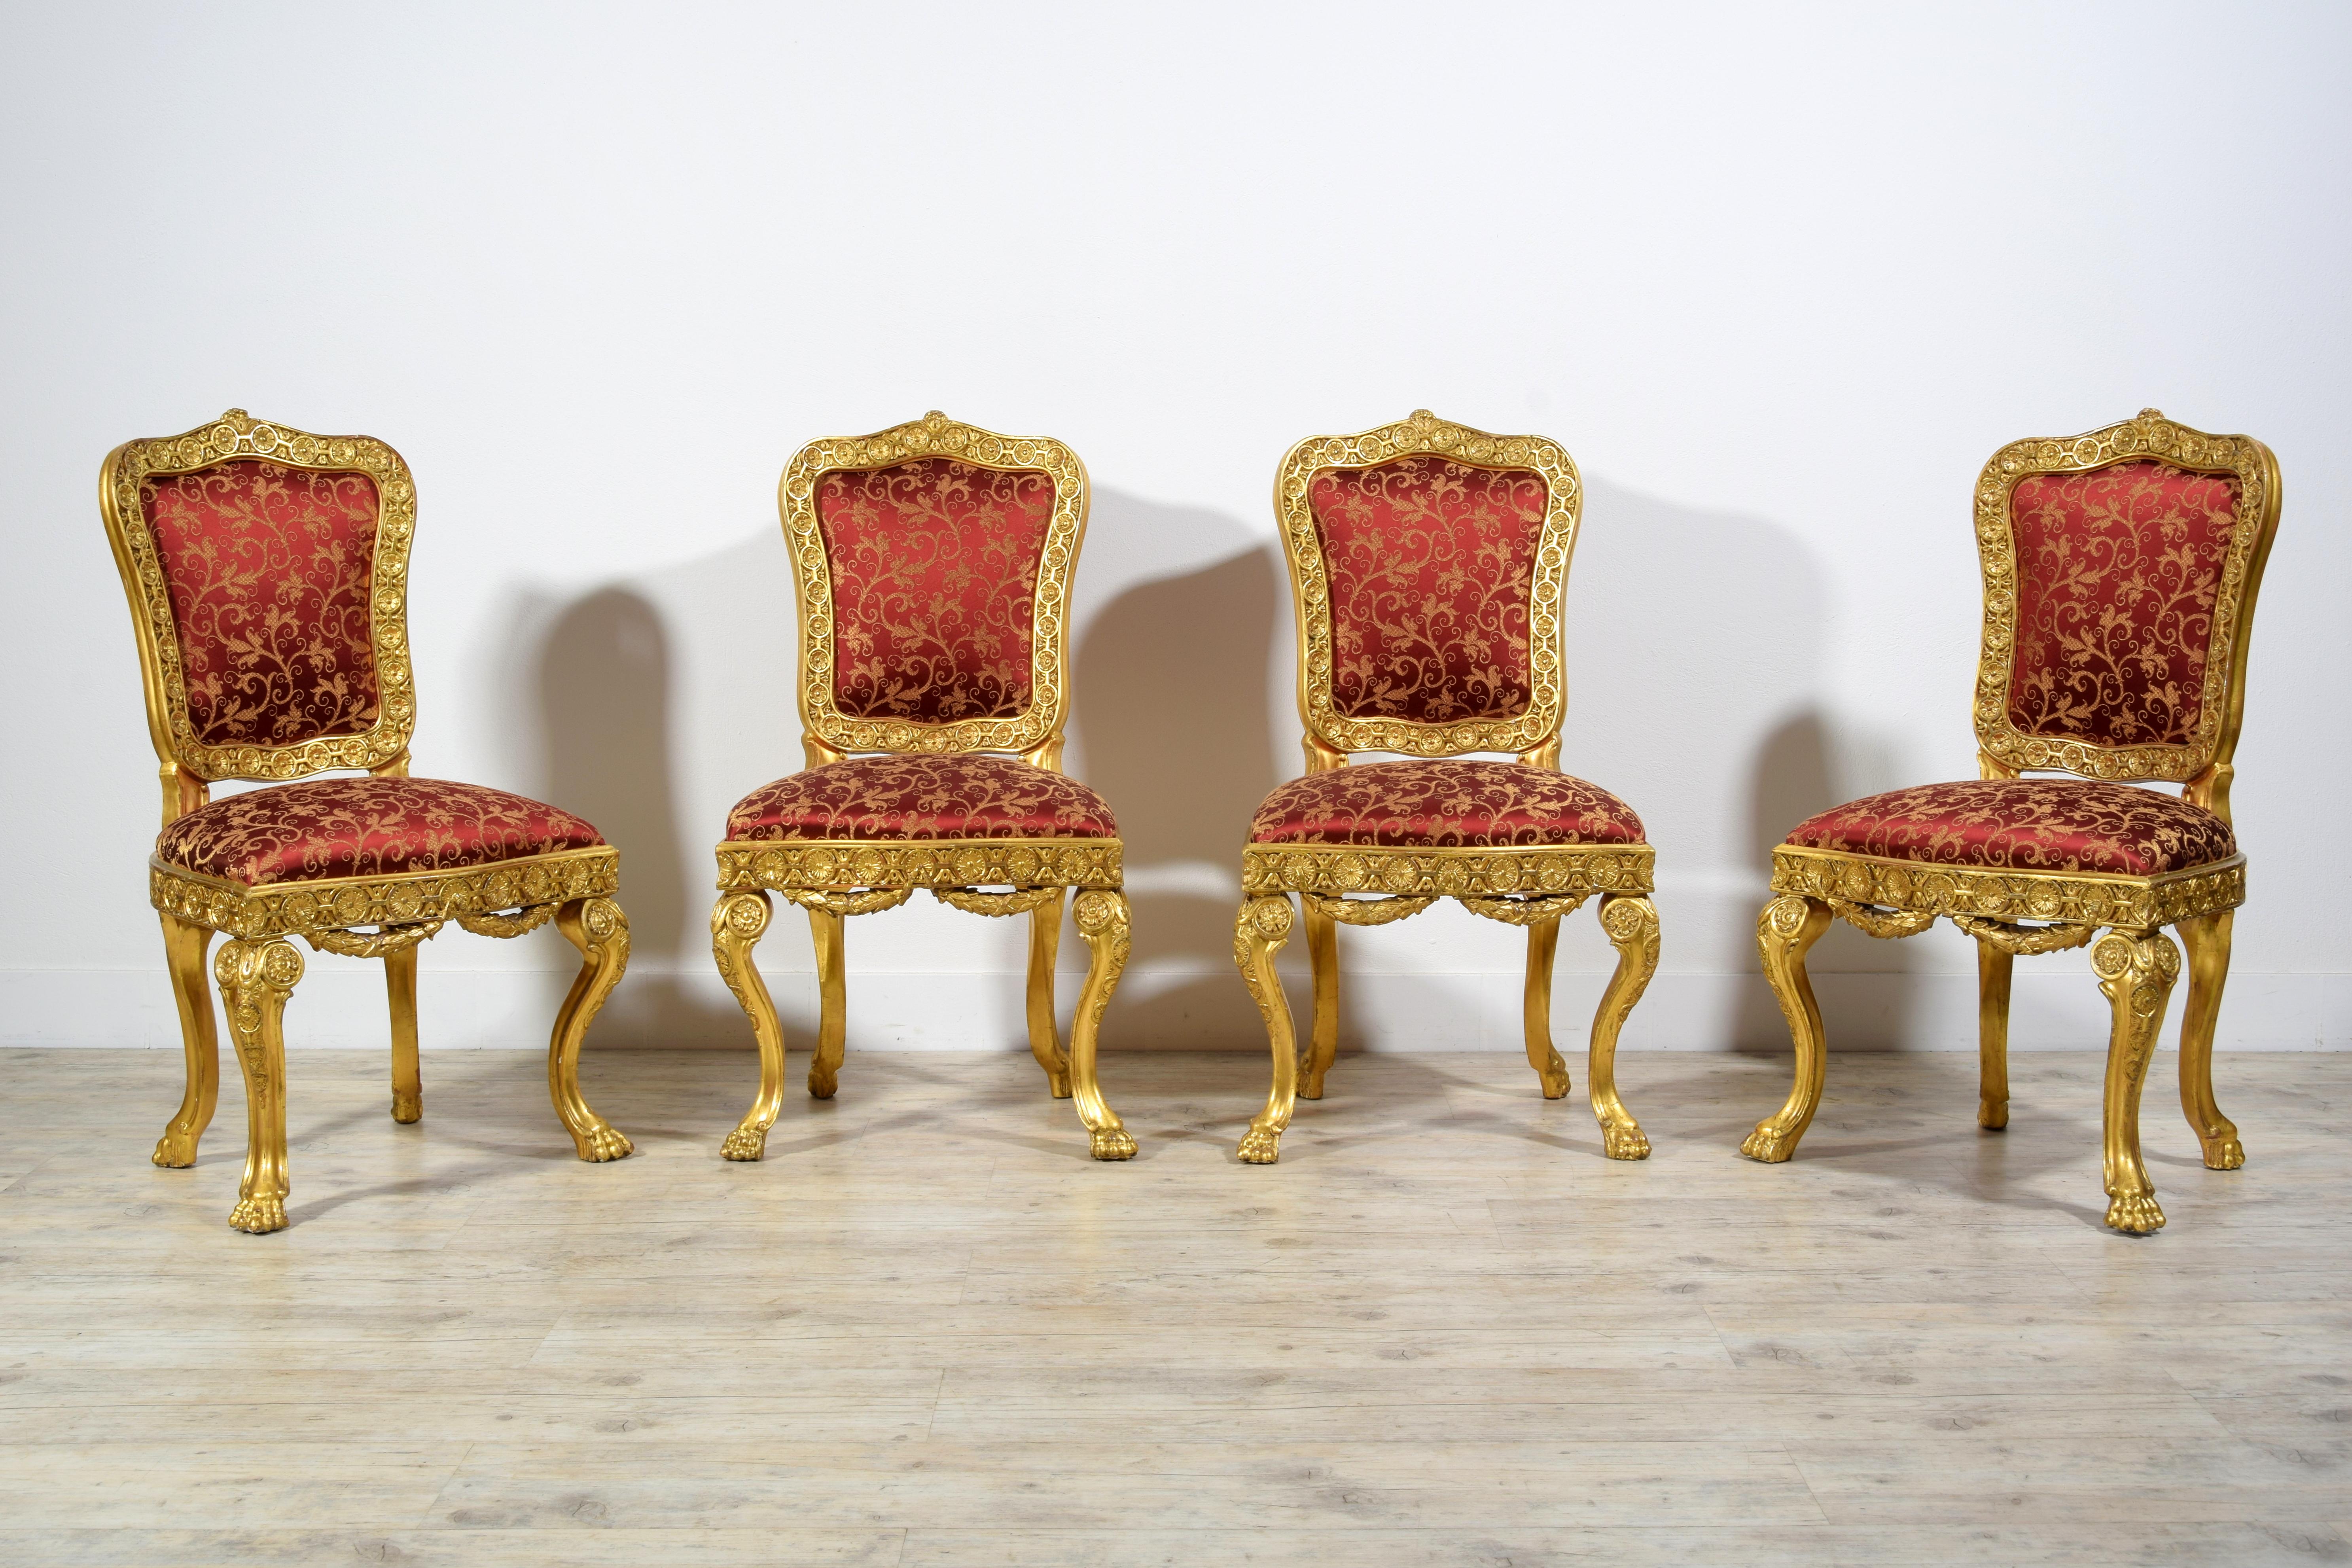 18th Century Four Italian Baroque Carved giltwood Chairs 

The four fine chairs were made in Rome (Italy) around the middle of the eighteenth century in the Baroque era.
The carved and gilded wooden structure has sculptures with floral and